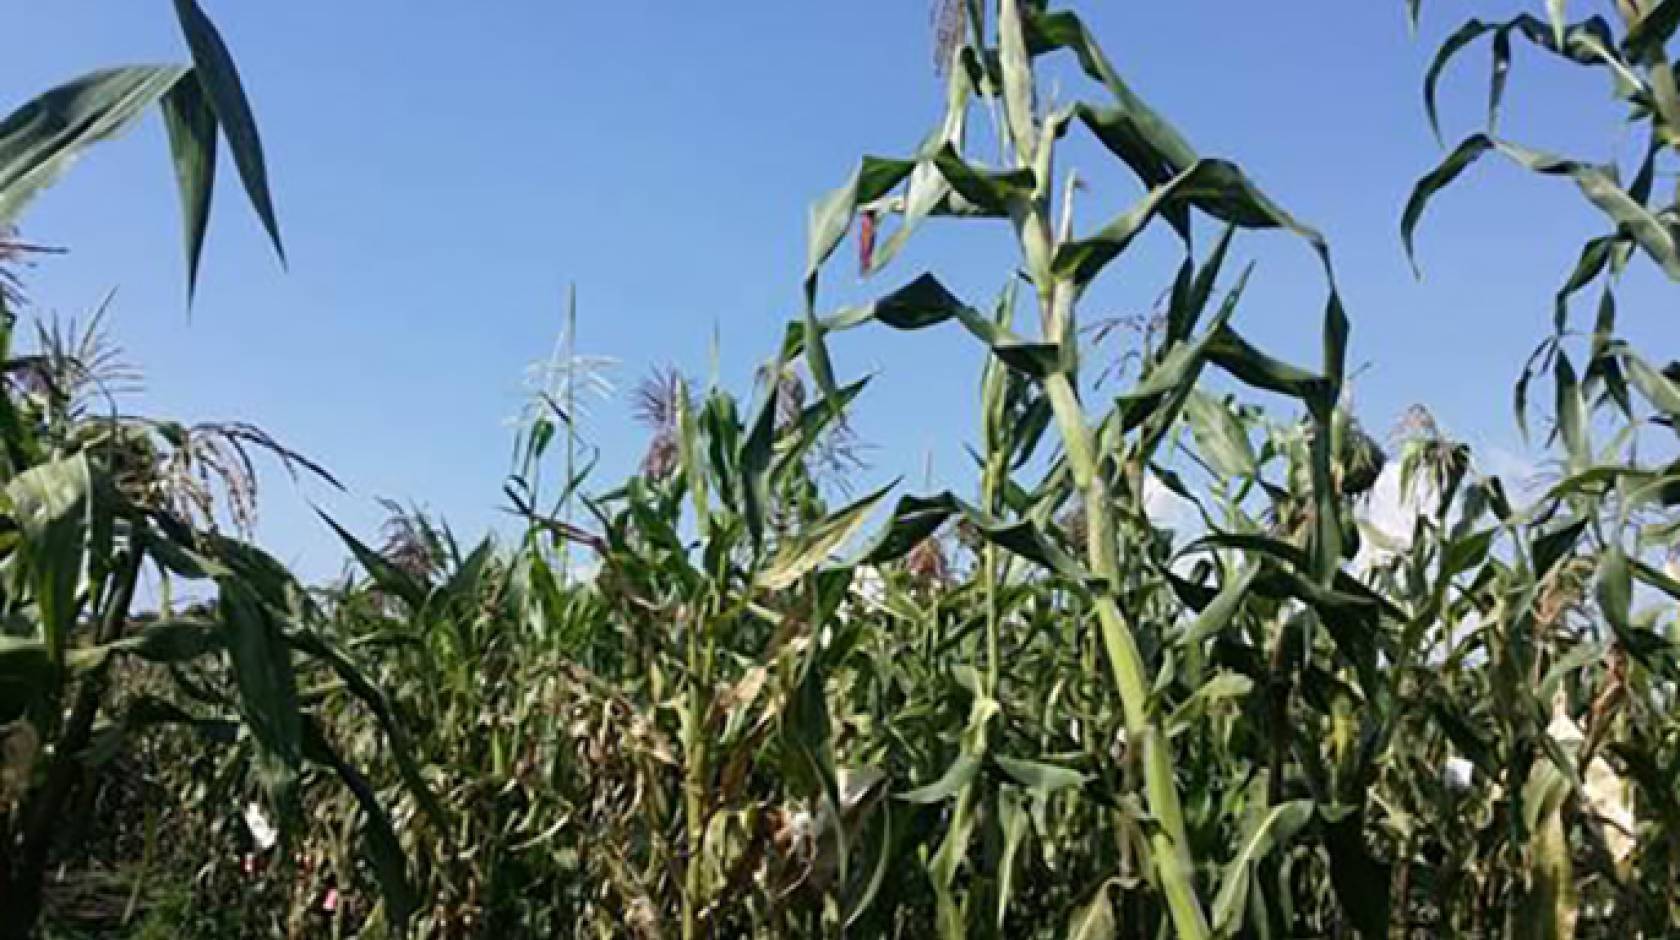 Maize growing at a highland field site in Toluca, Mexico. UC Davis researchers are studying how maize adapted to different environments. The new knowledge could aid in breeding crops resistant to climate change. 